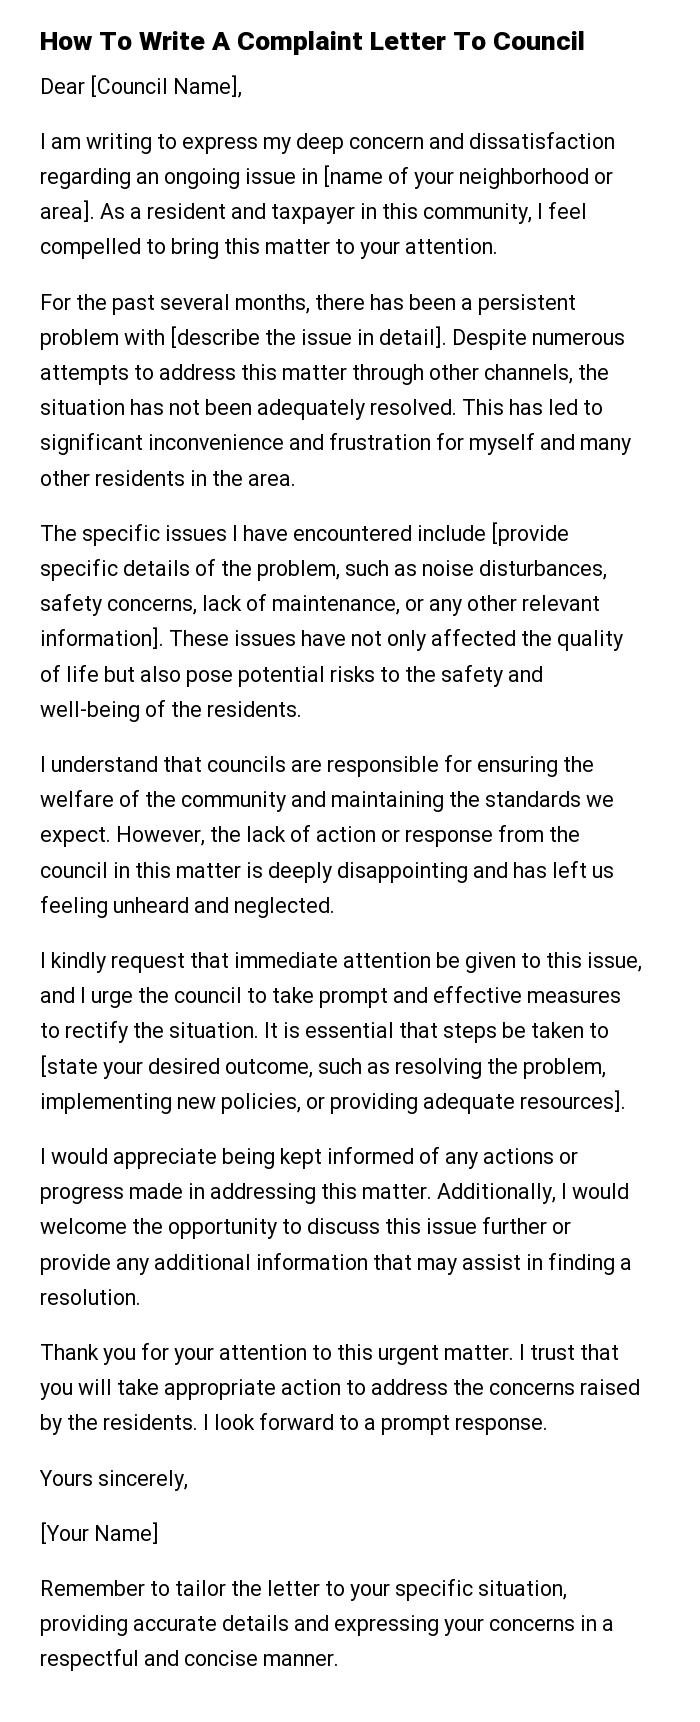 How To Write A Complaint Letter To Council